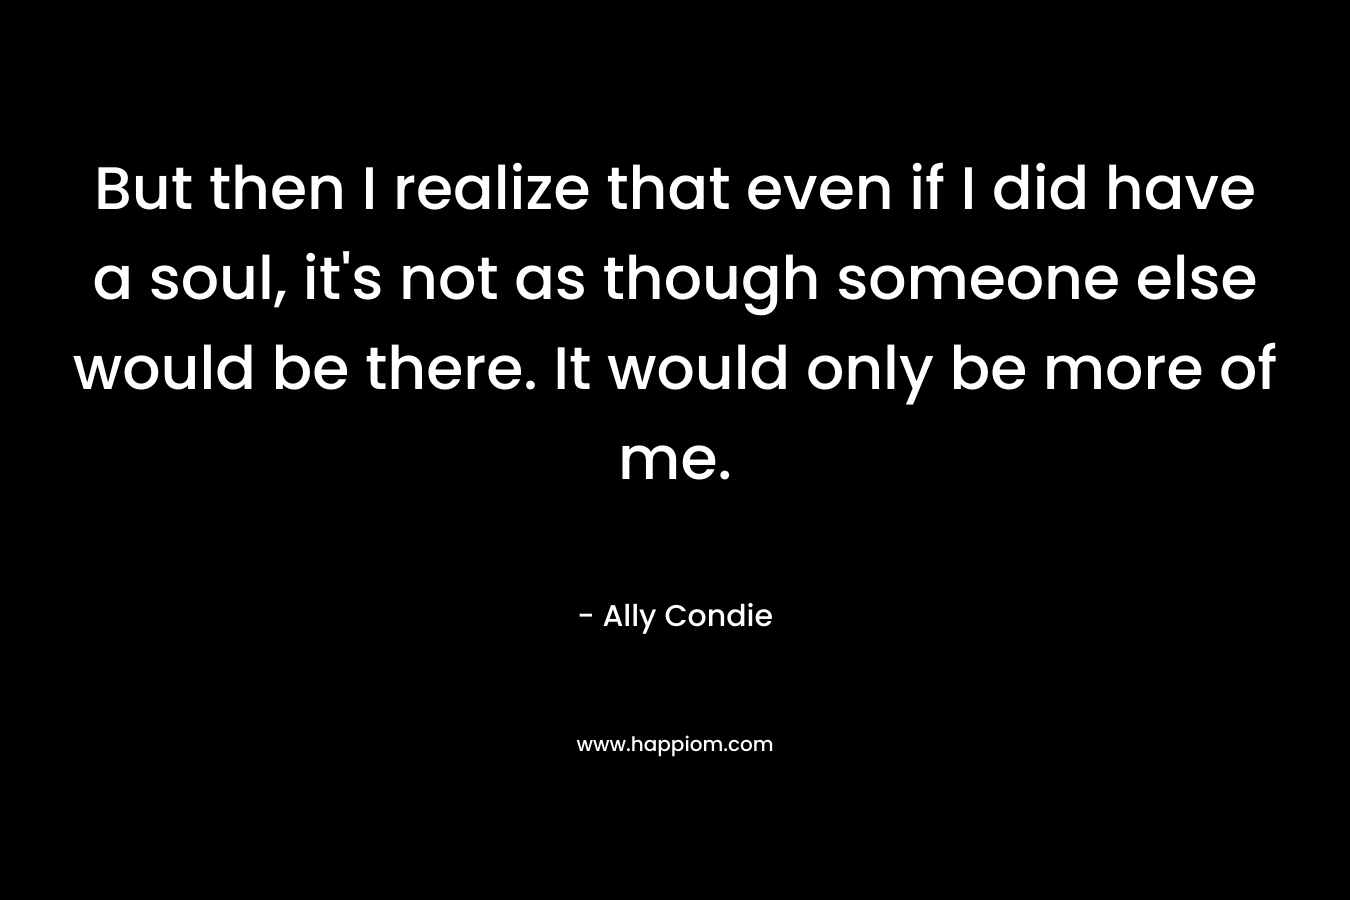 But then I realize that even if I did have a soul, it's not as though someone else would be there. It would only be more of me.